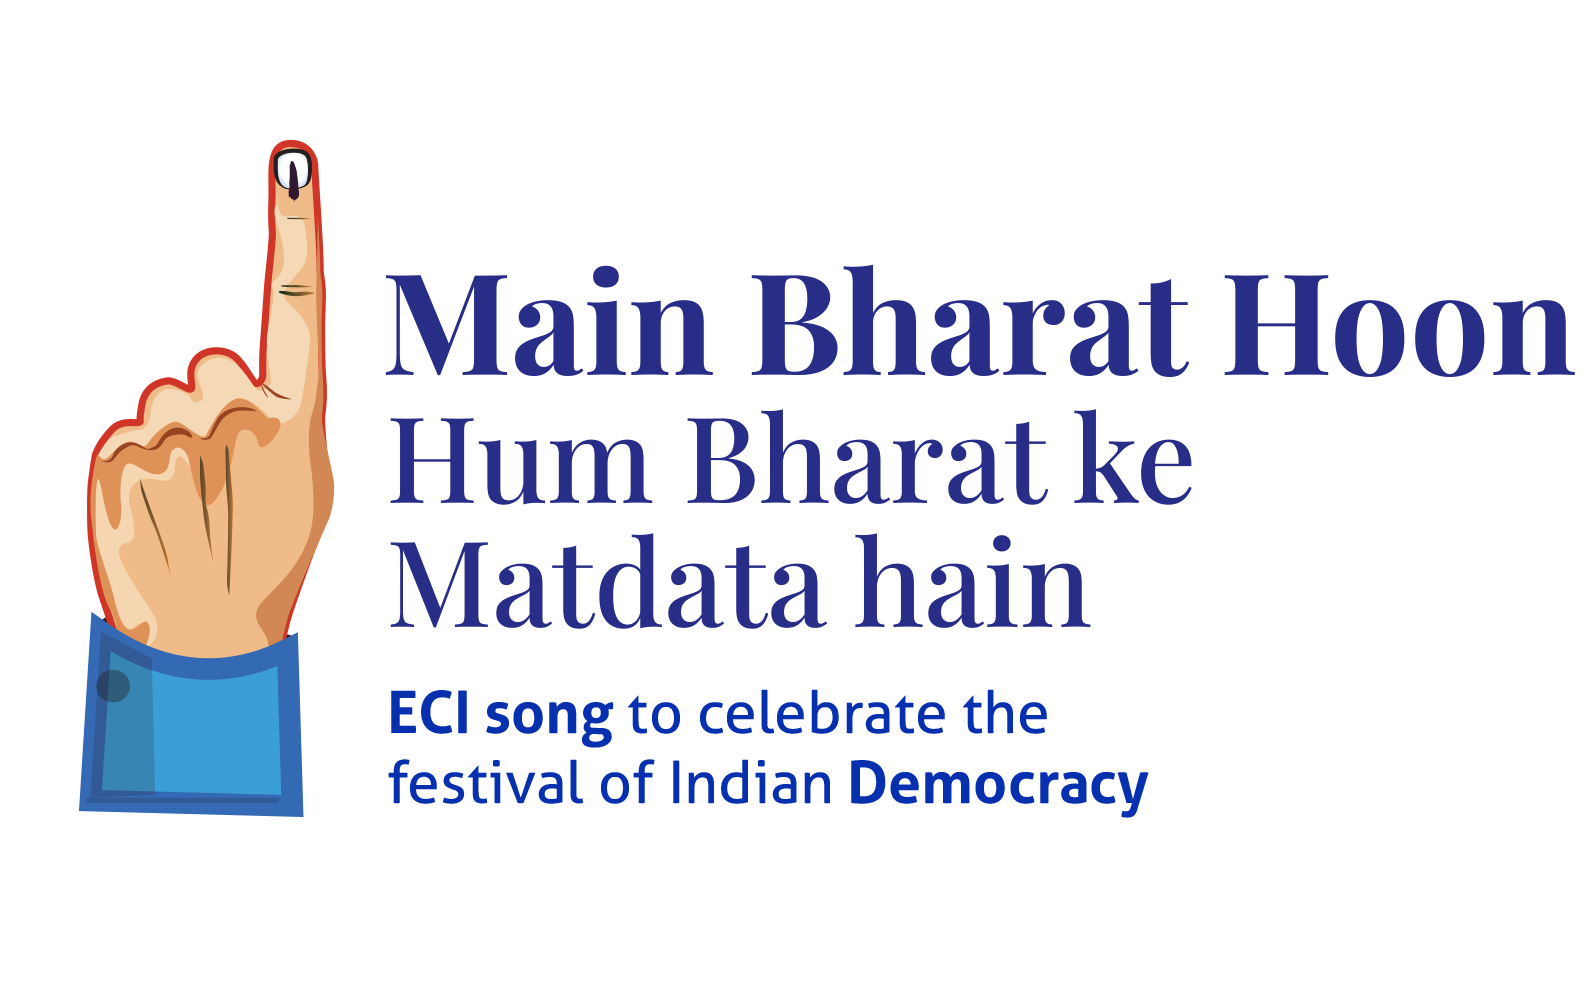 Click to listen to ECI Song - Main Bharat Hoon